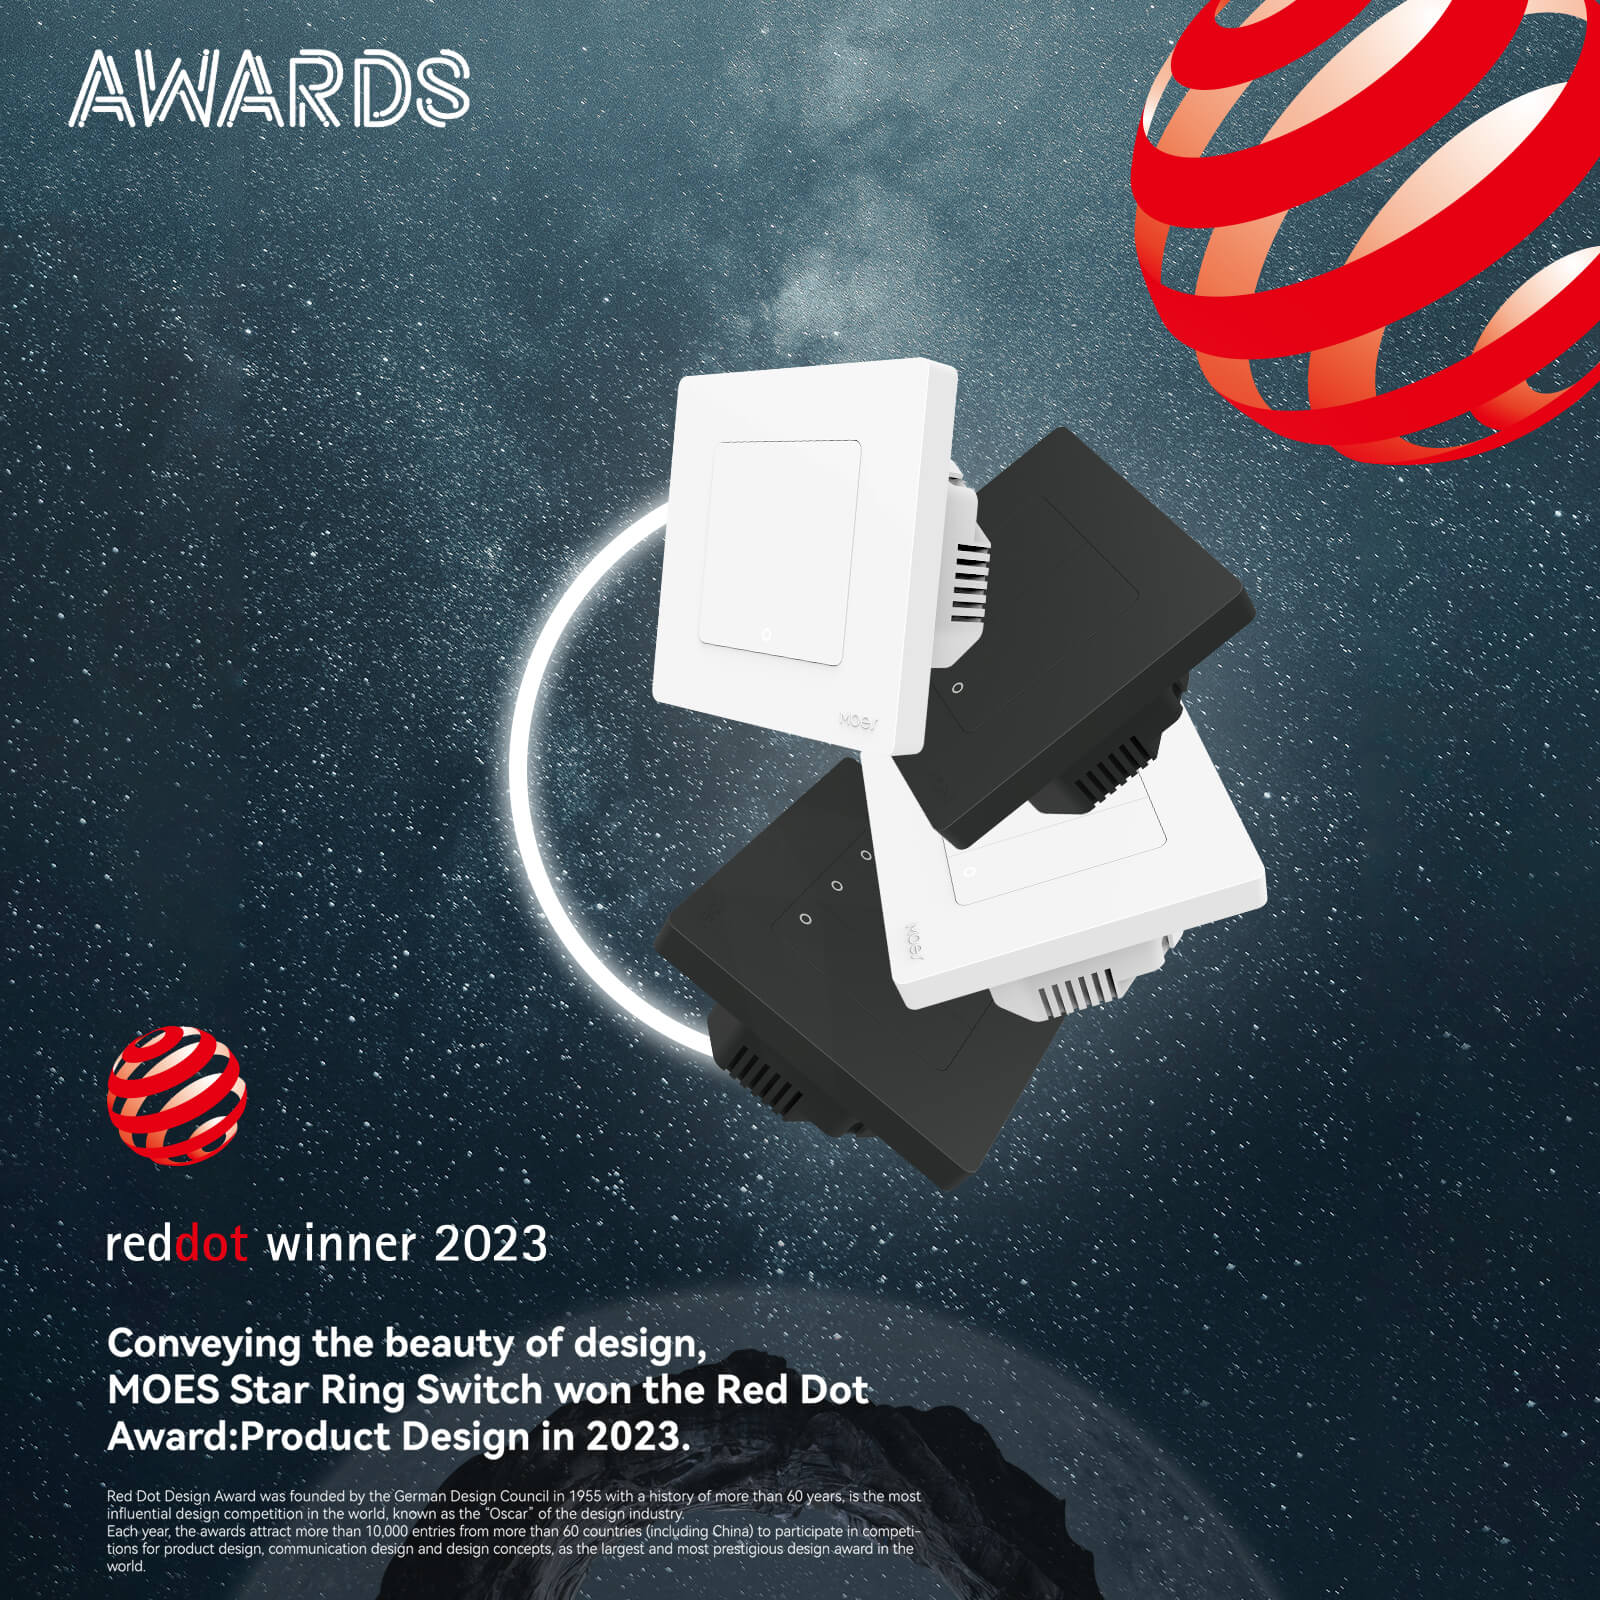 MOES Star Ring Switch won the Red Dot Award:Product Design in 2023 - MOES